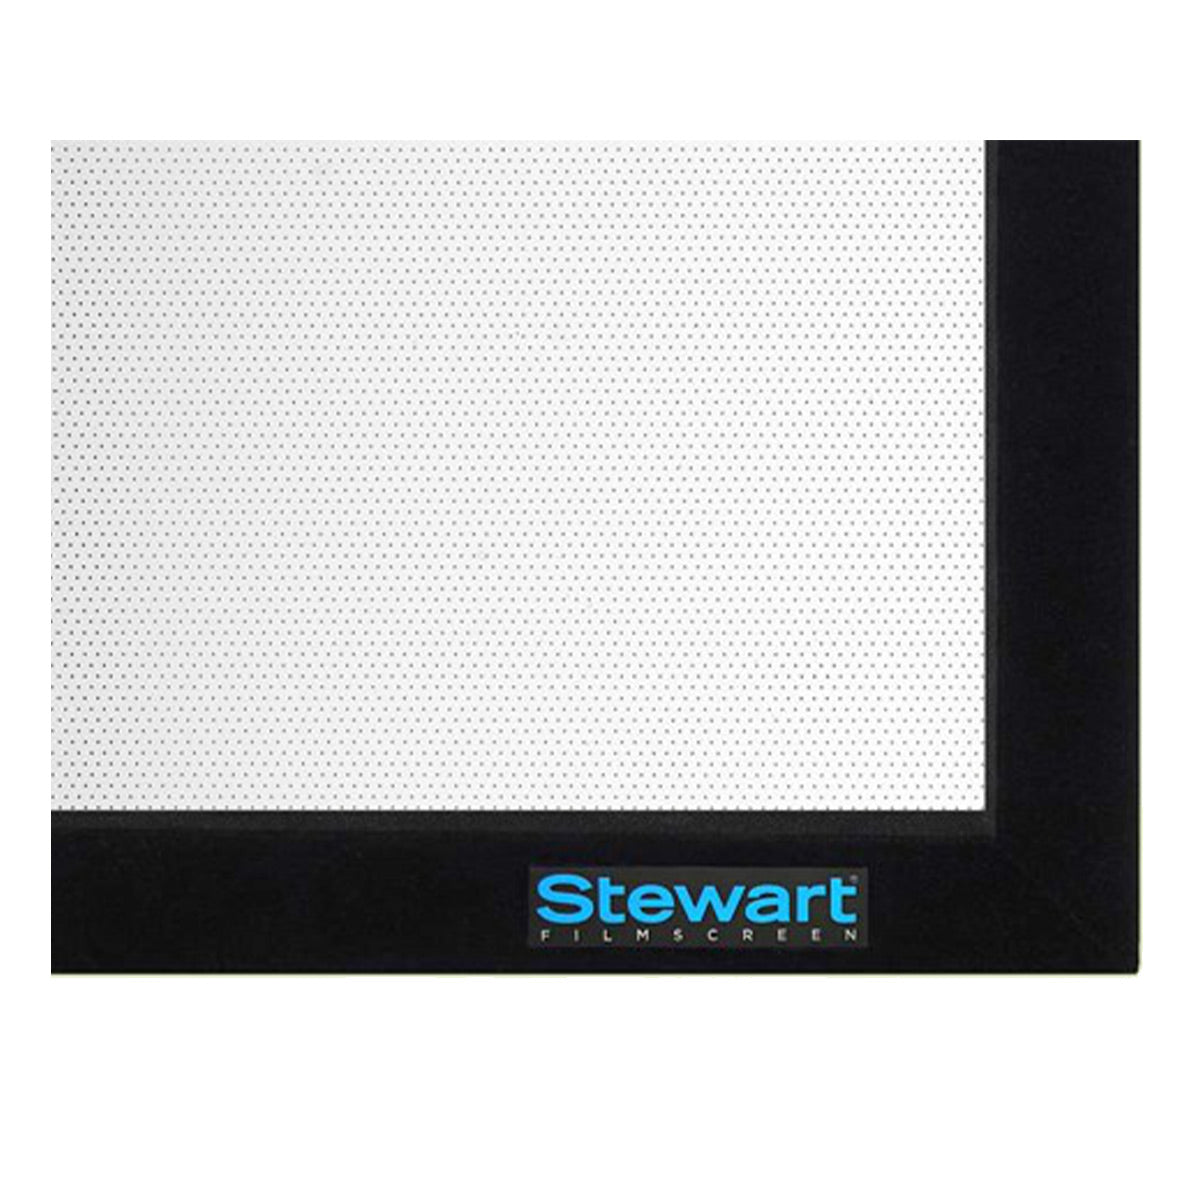 Stewart WallScreen Deluxe 110" HDTV Projector Screen with 3.25" Fixed Frame, 1.3 Peak Gain Material, Quick Snap System, and EZ Mount Bracket (StudioTek 130 G4)